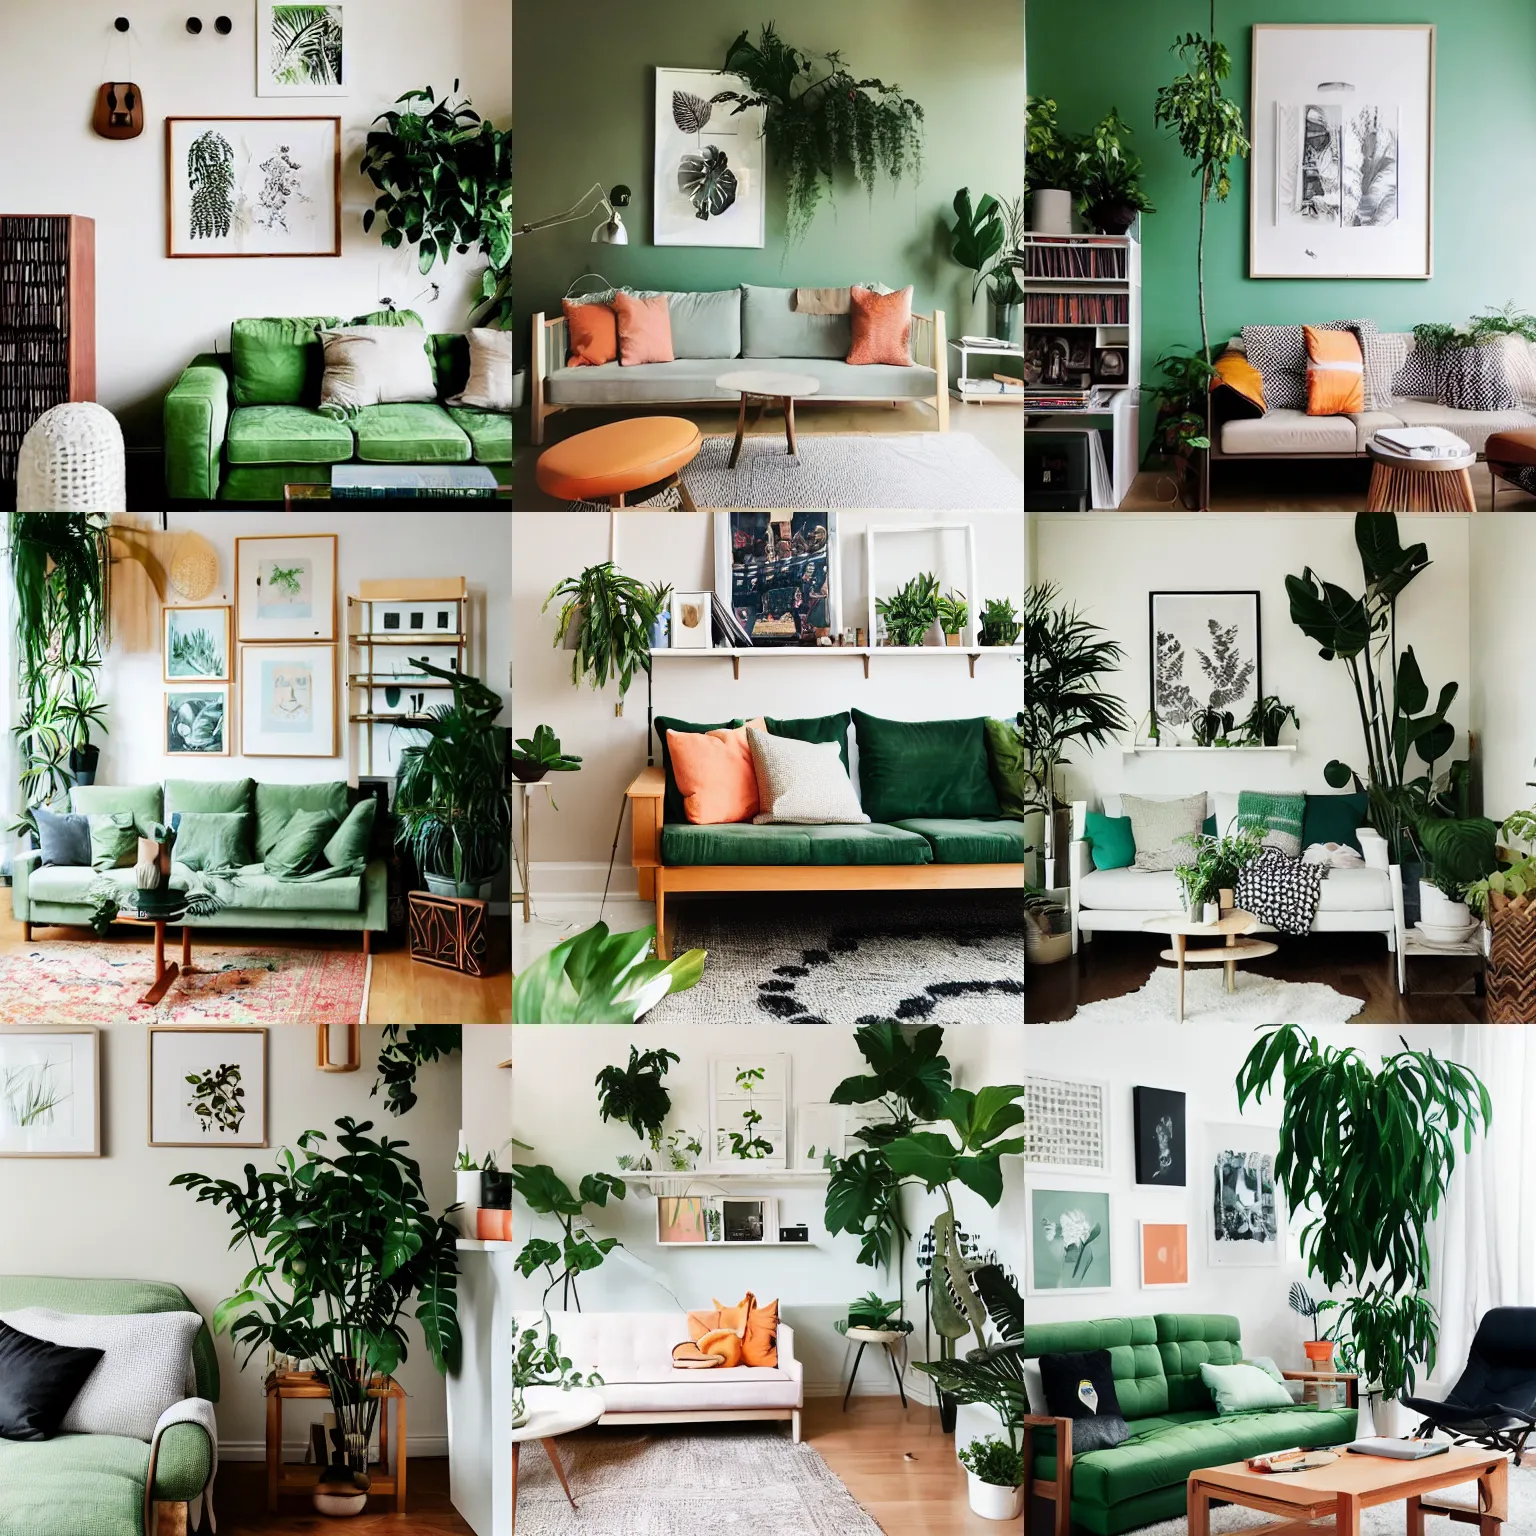 Prompt: living room interior design, japandi, ikea, sunny, warm wood, urban jungle plants, art wall, music instruments, music records, pale green and hints of light pale pastel orange